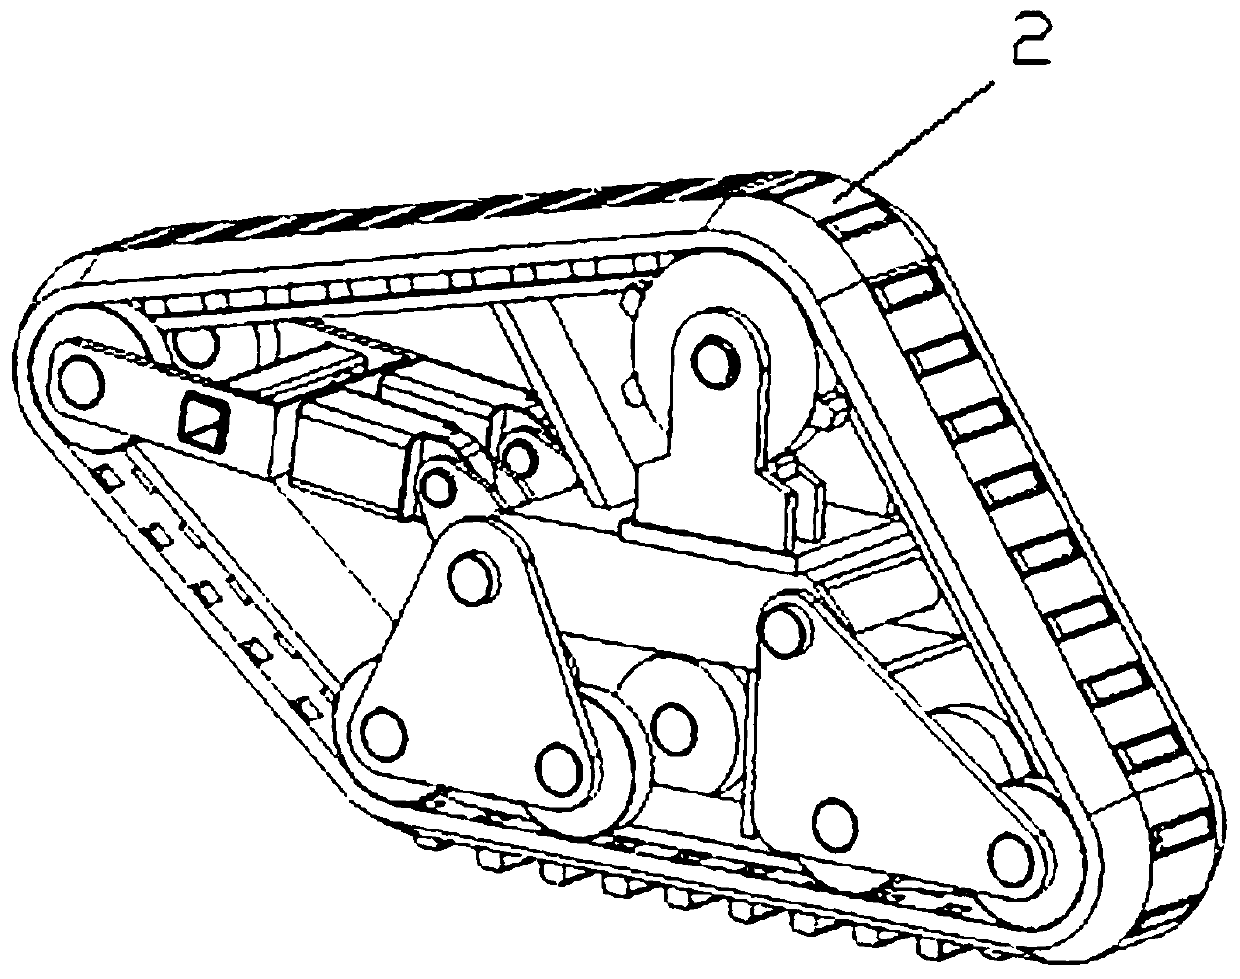 Anti-drag crawler walking device with movable grousers